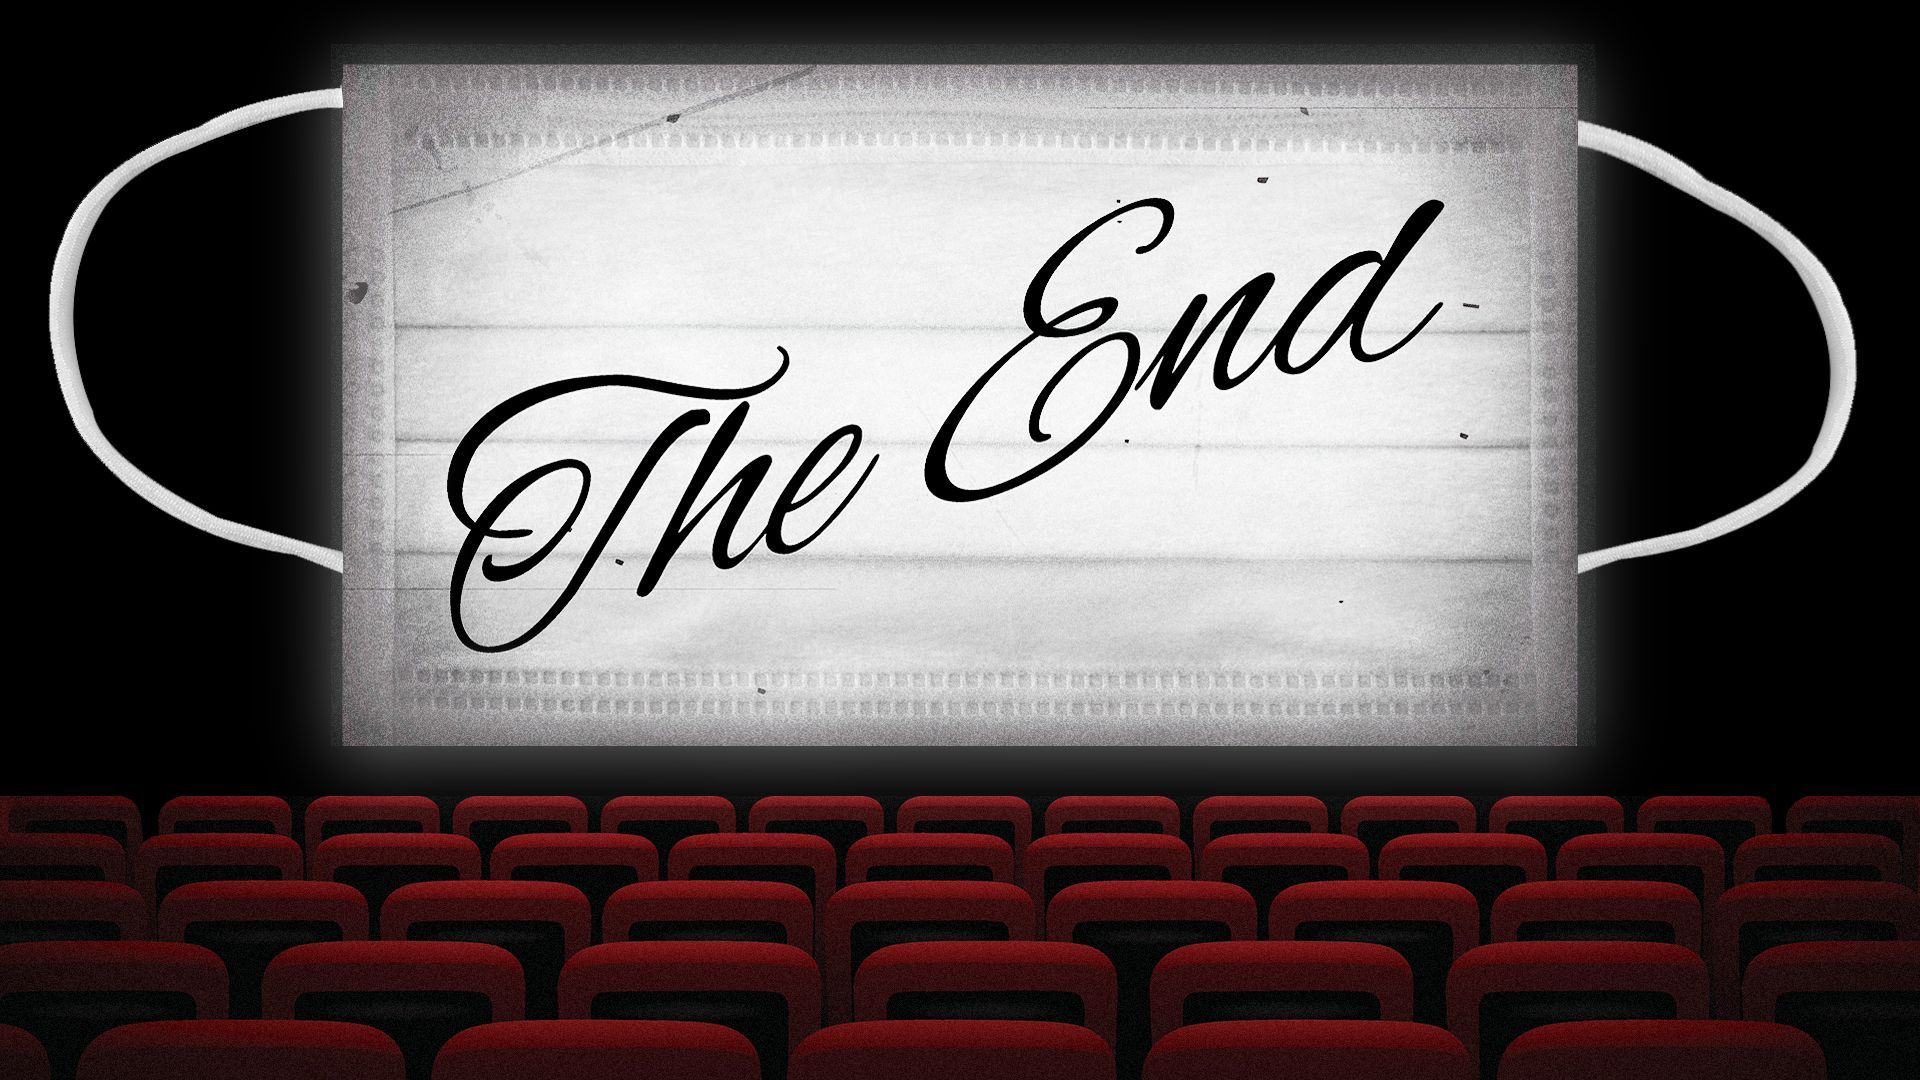 Illustration of a movie theater screen made from a face mask displaying the words "The End"